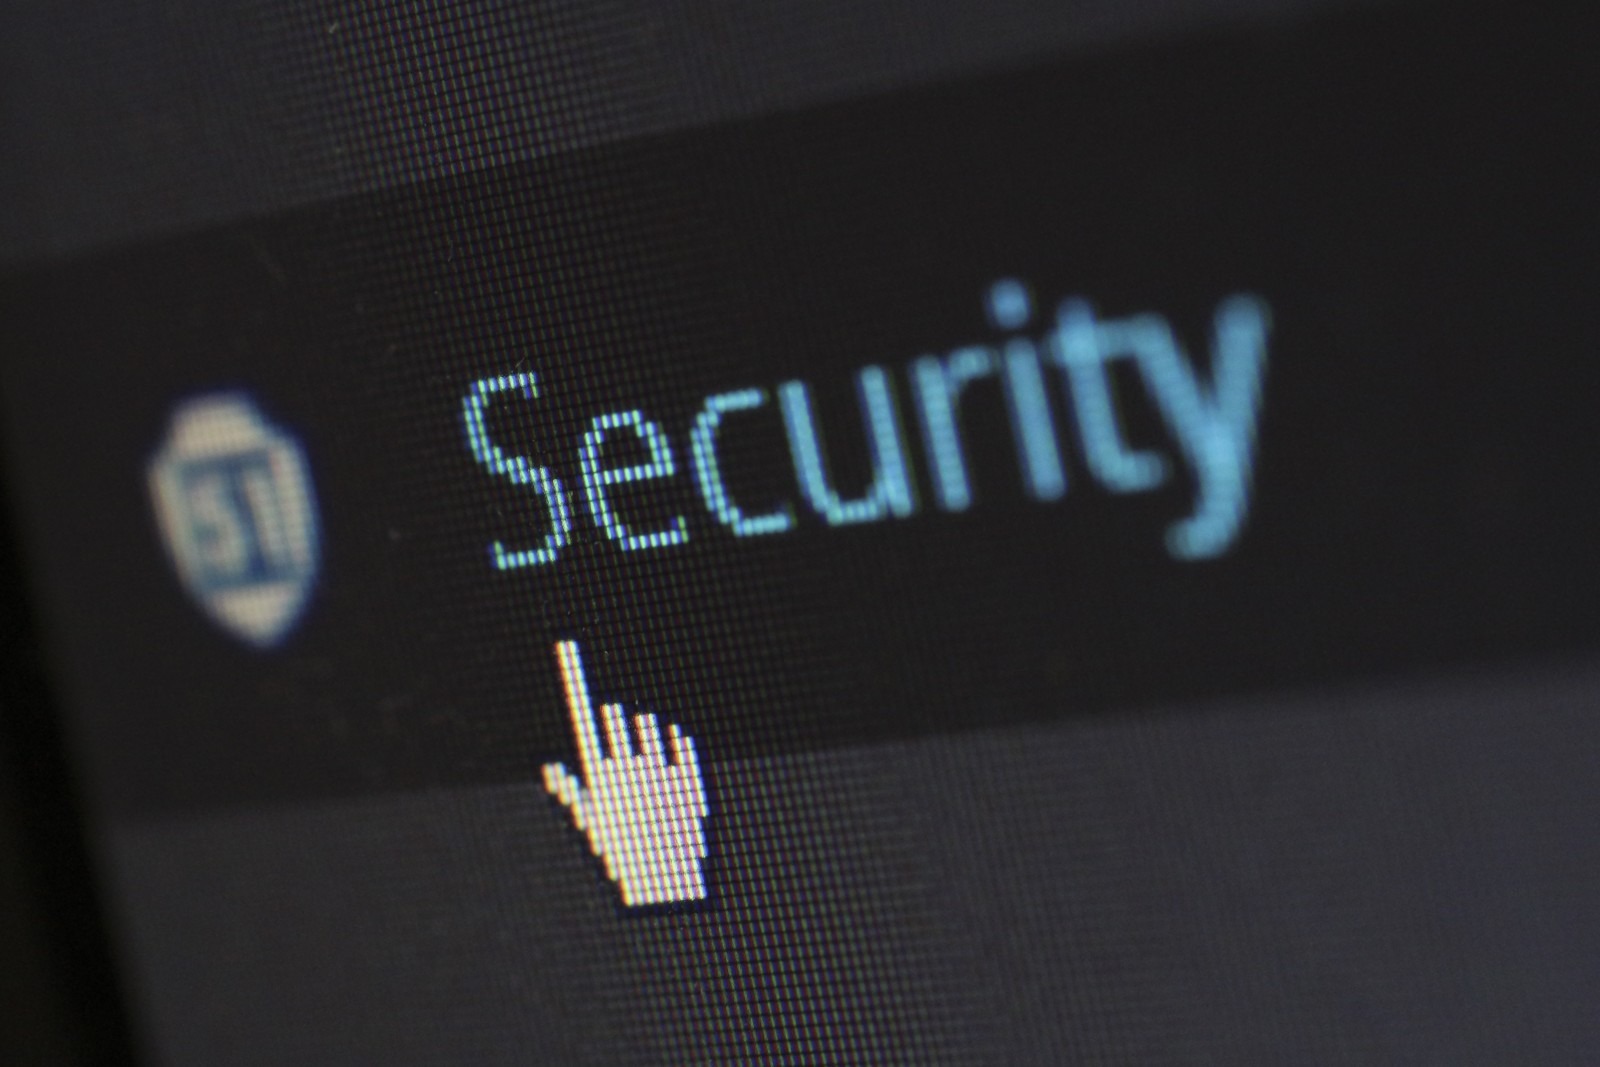 Closeup of a computer screen, mouse cursor hovering over "Security" text